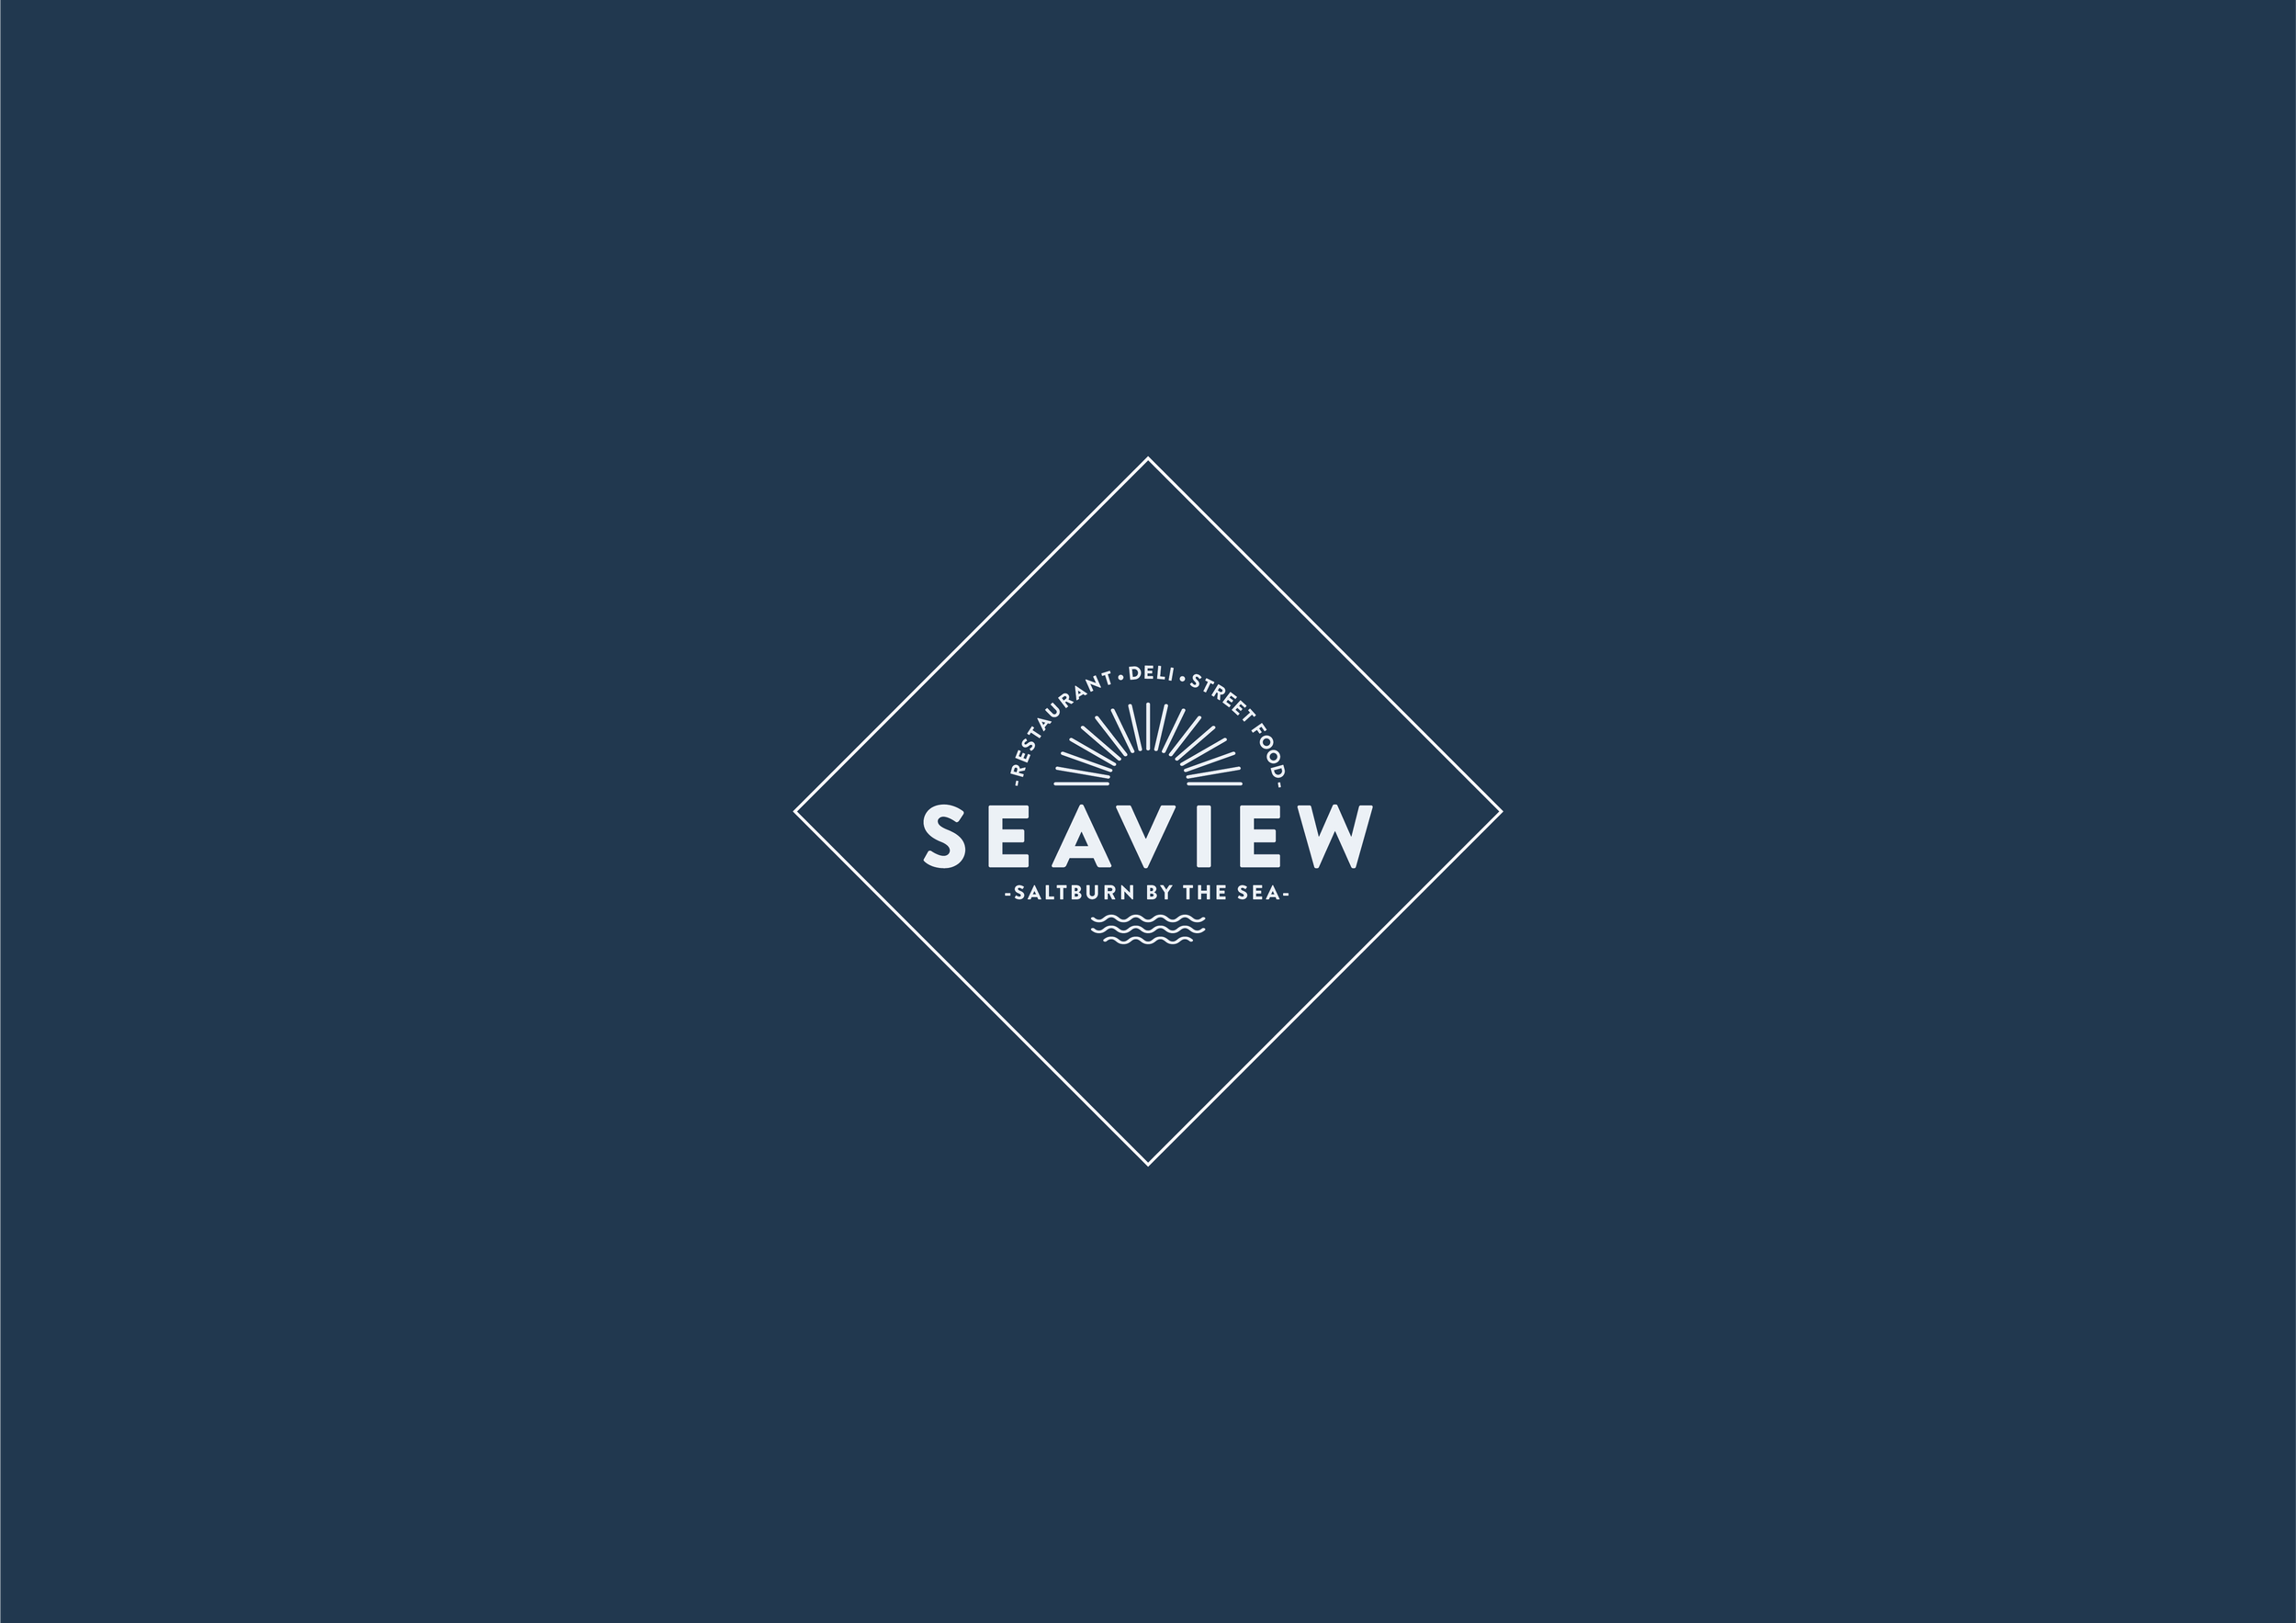 Logo design and Brand identity design for Yorkshire based restaurant - Logo and Sea and Sun Icon in Blue